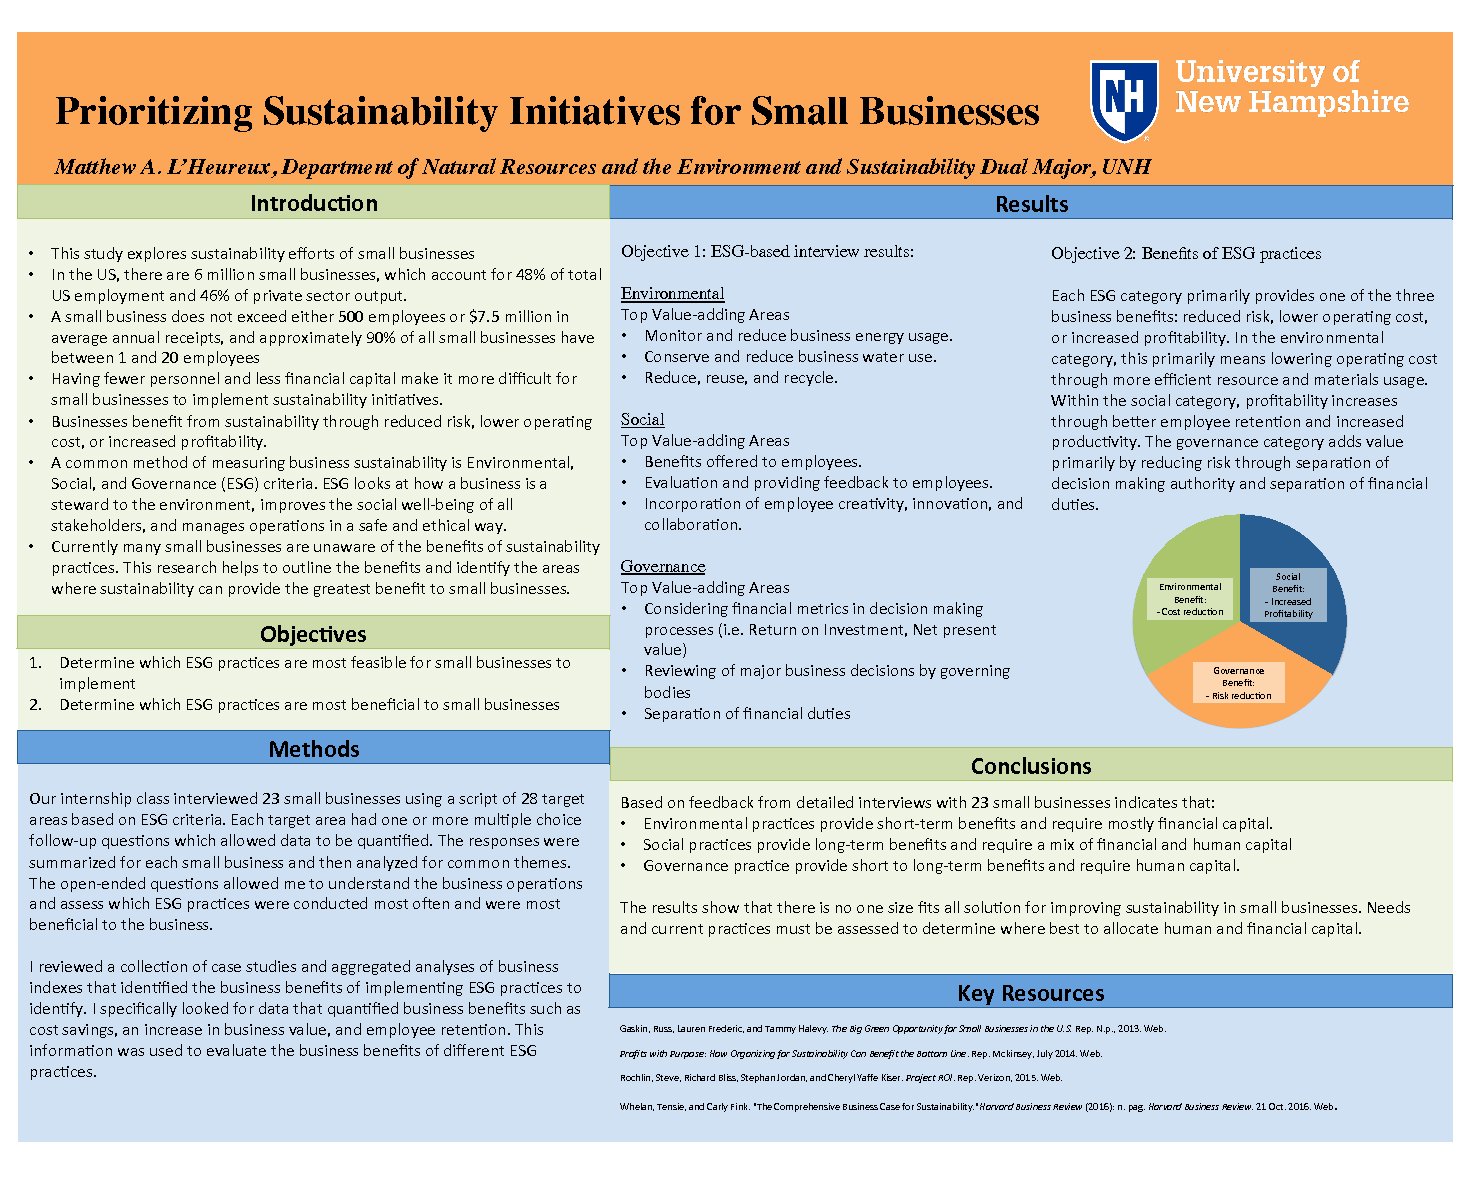 Prioritizing Sustainability Initiatives For Small Businesses by mal12